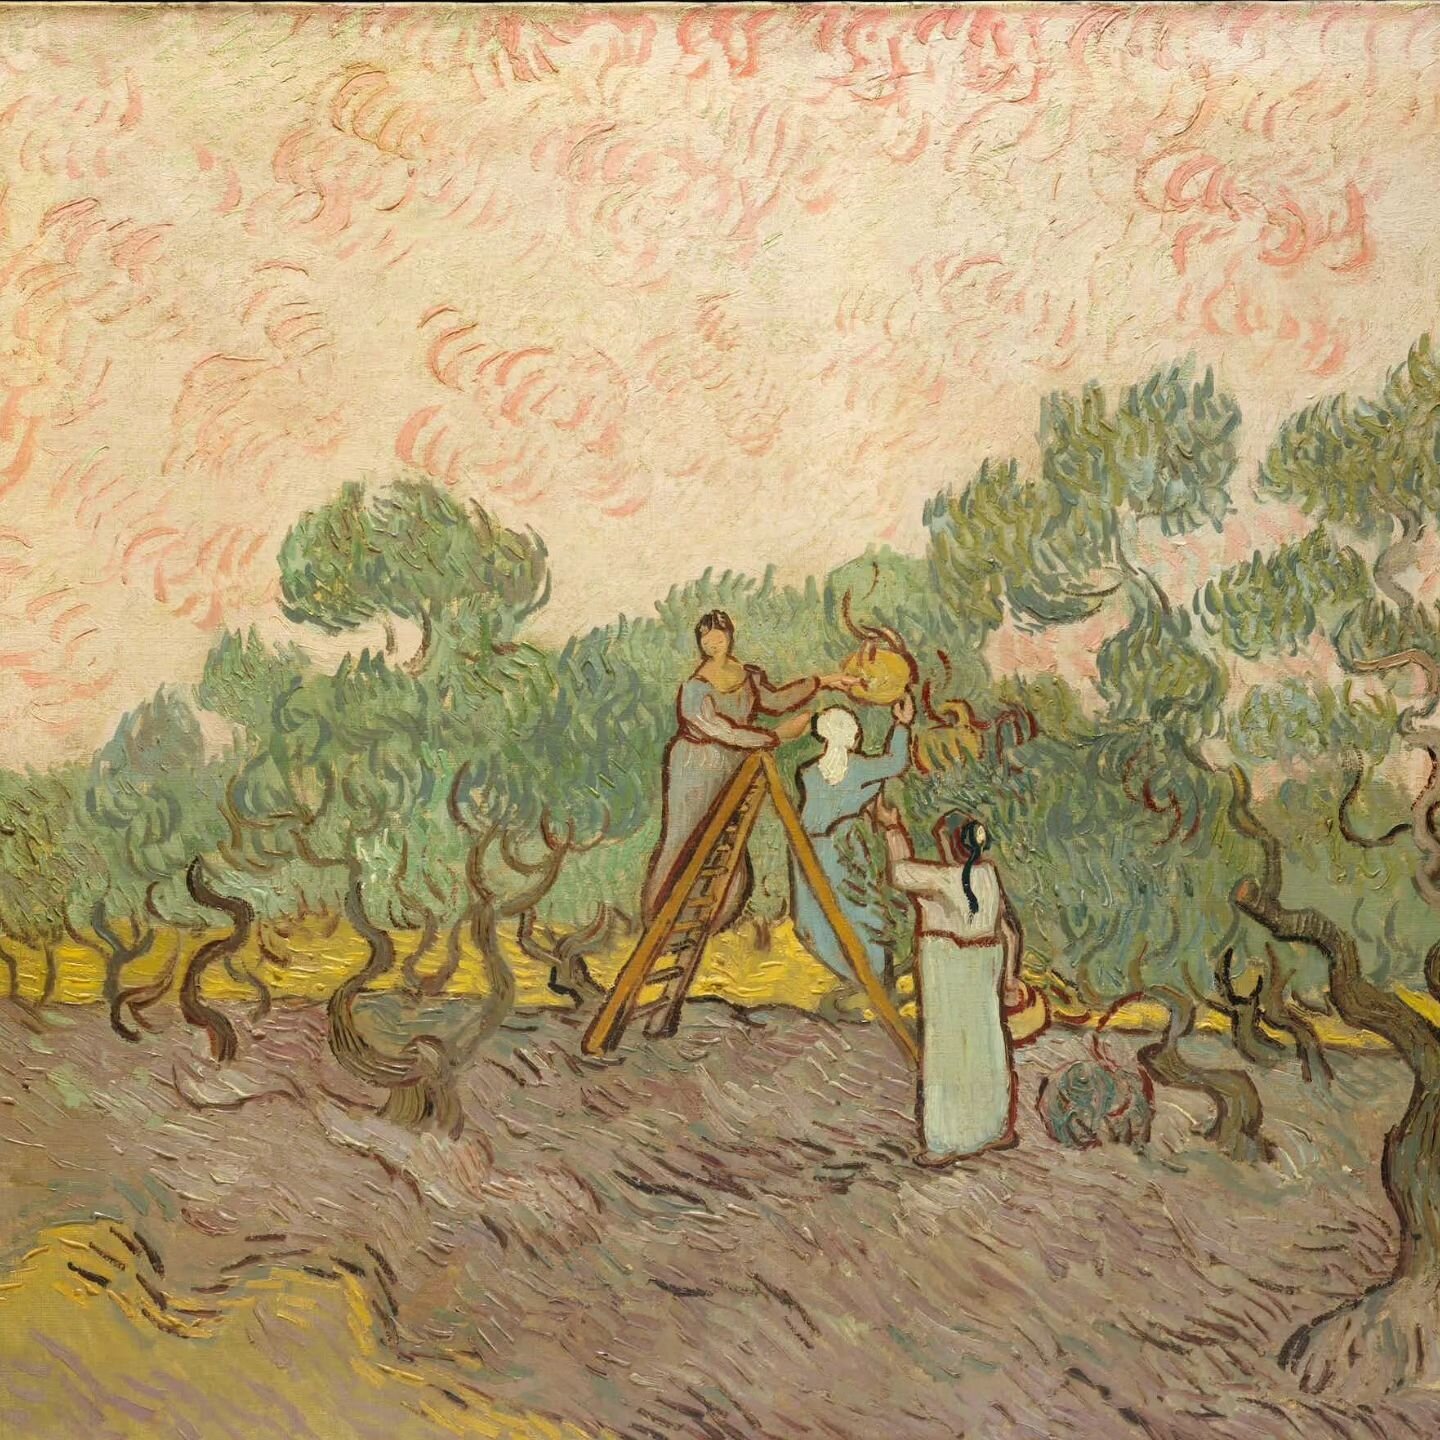 Van Gogh and me - plus ca change.

More notes on olive picking on the latest edition of the newsletter:  https://houseinprovence.substack.com